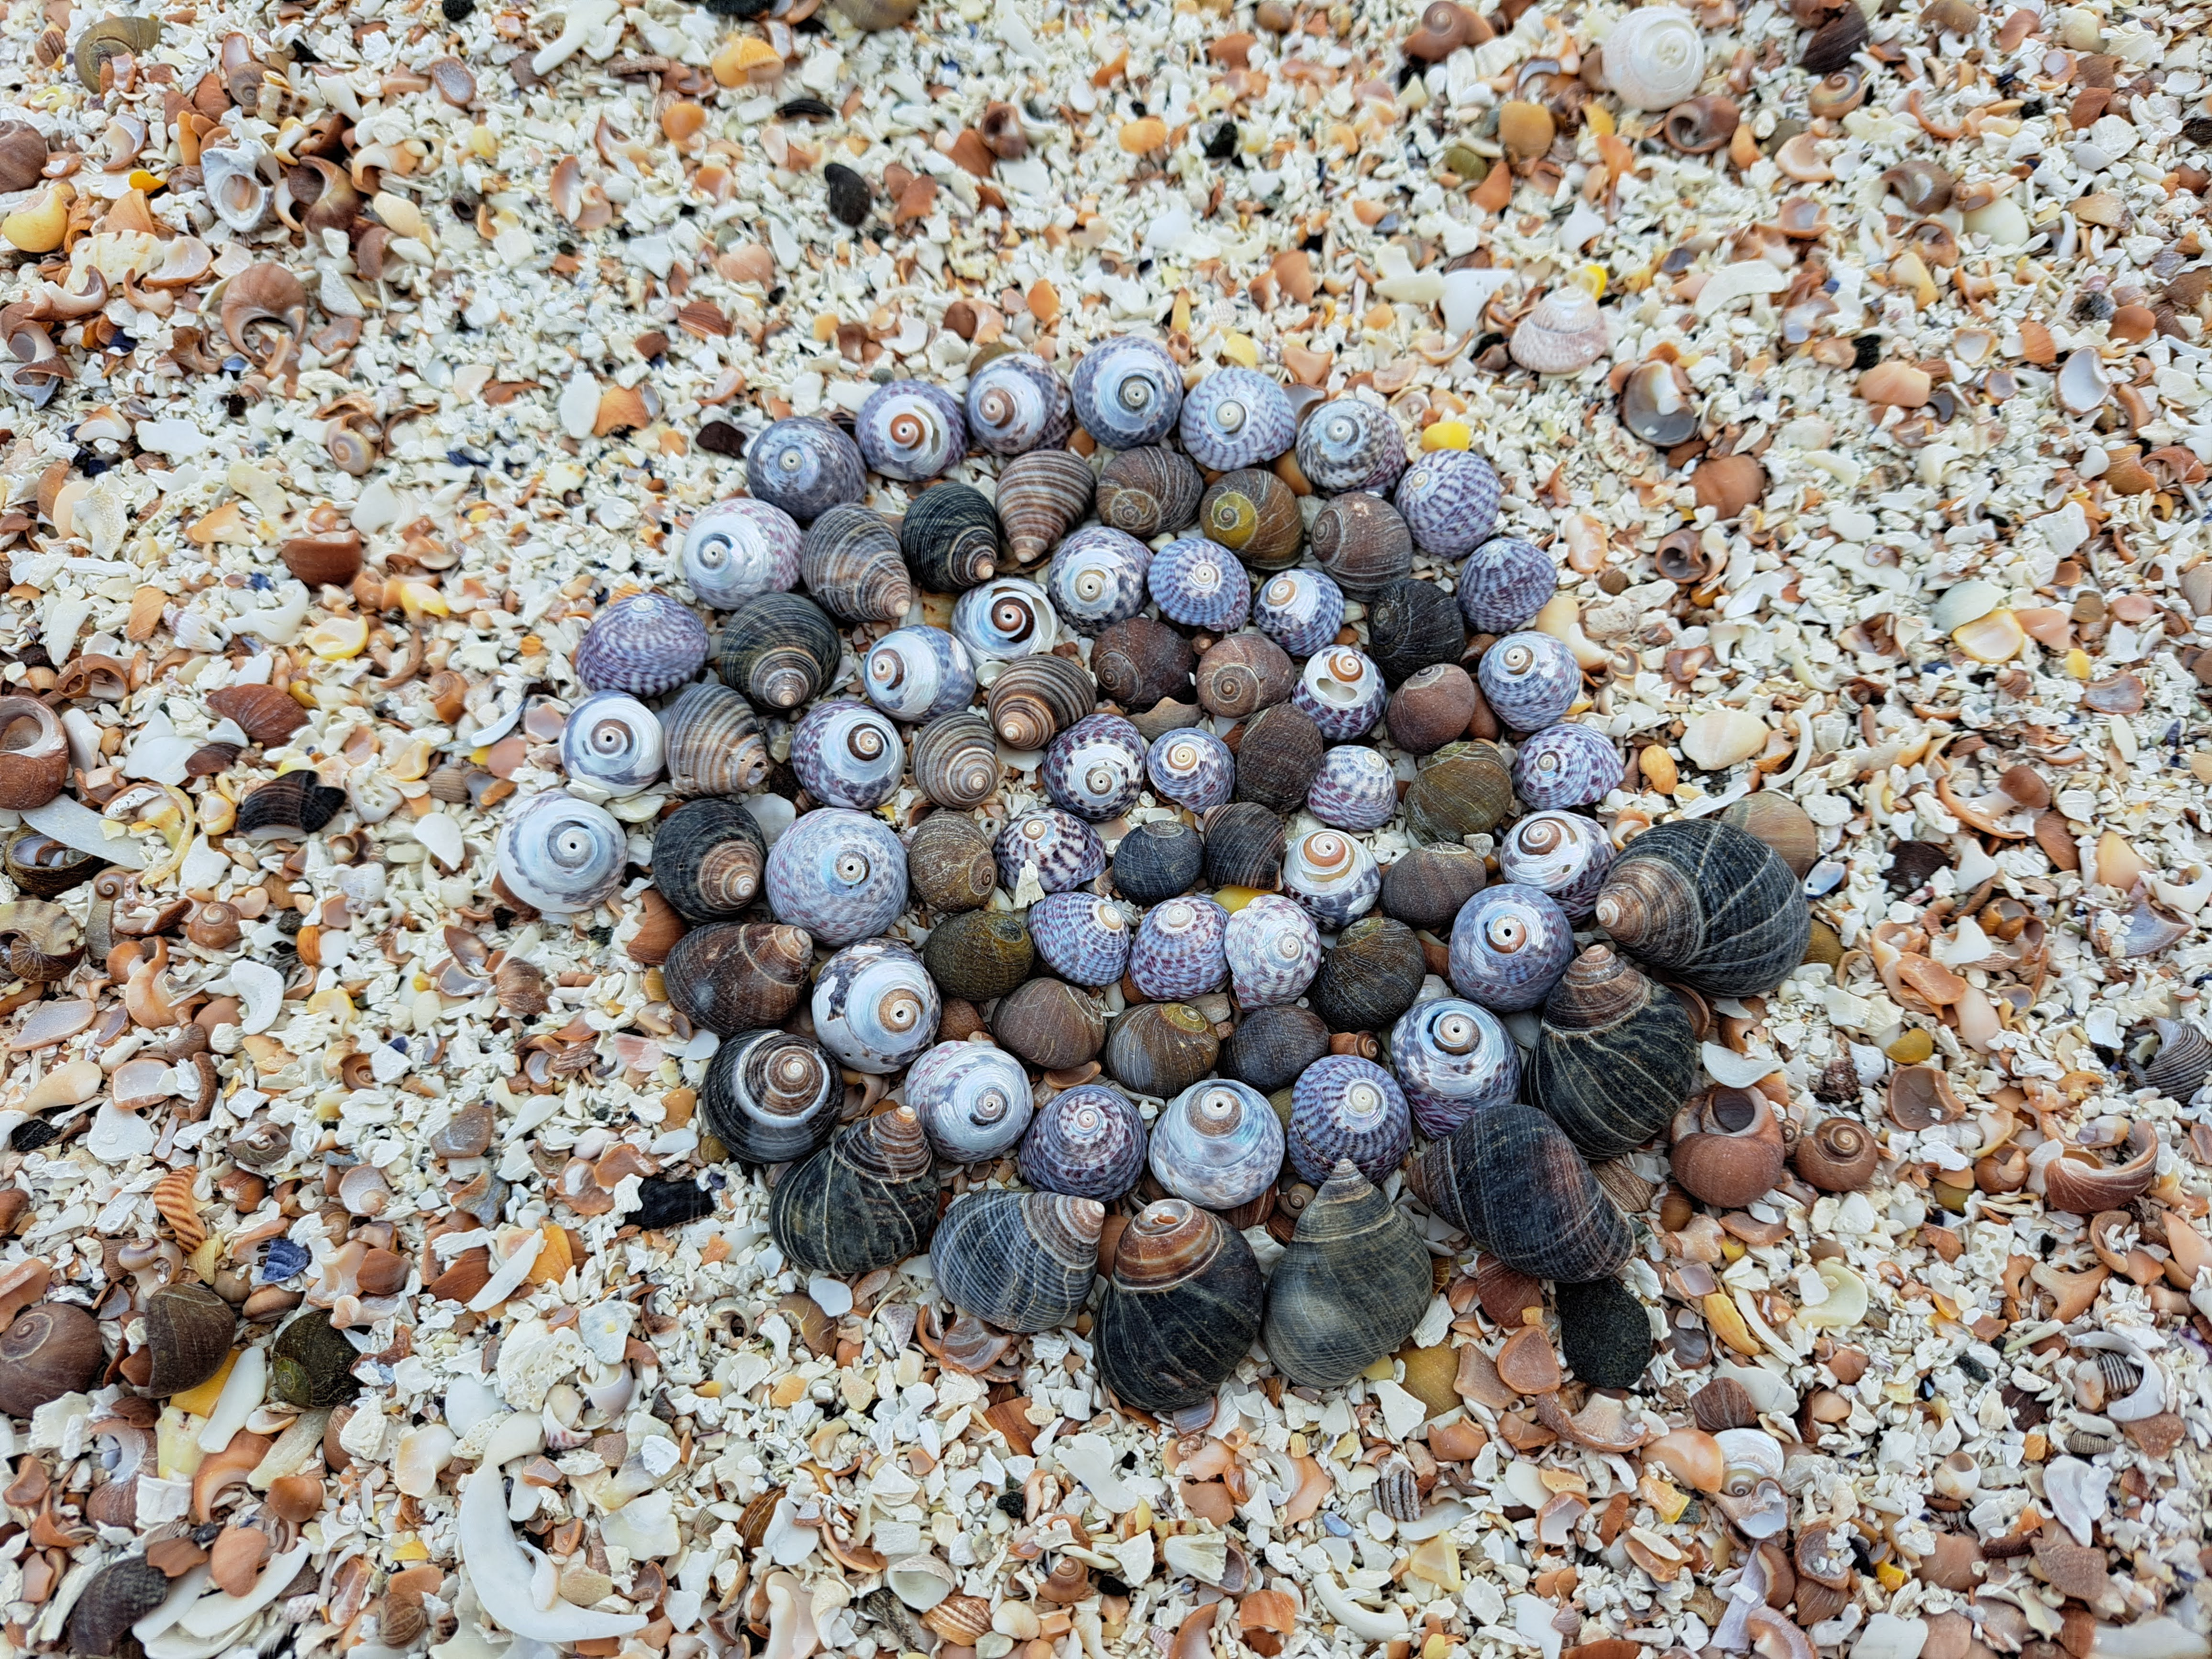 Shells arranged in the shape of a spiral